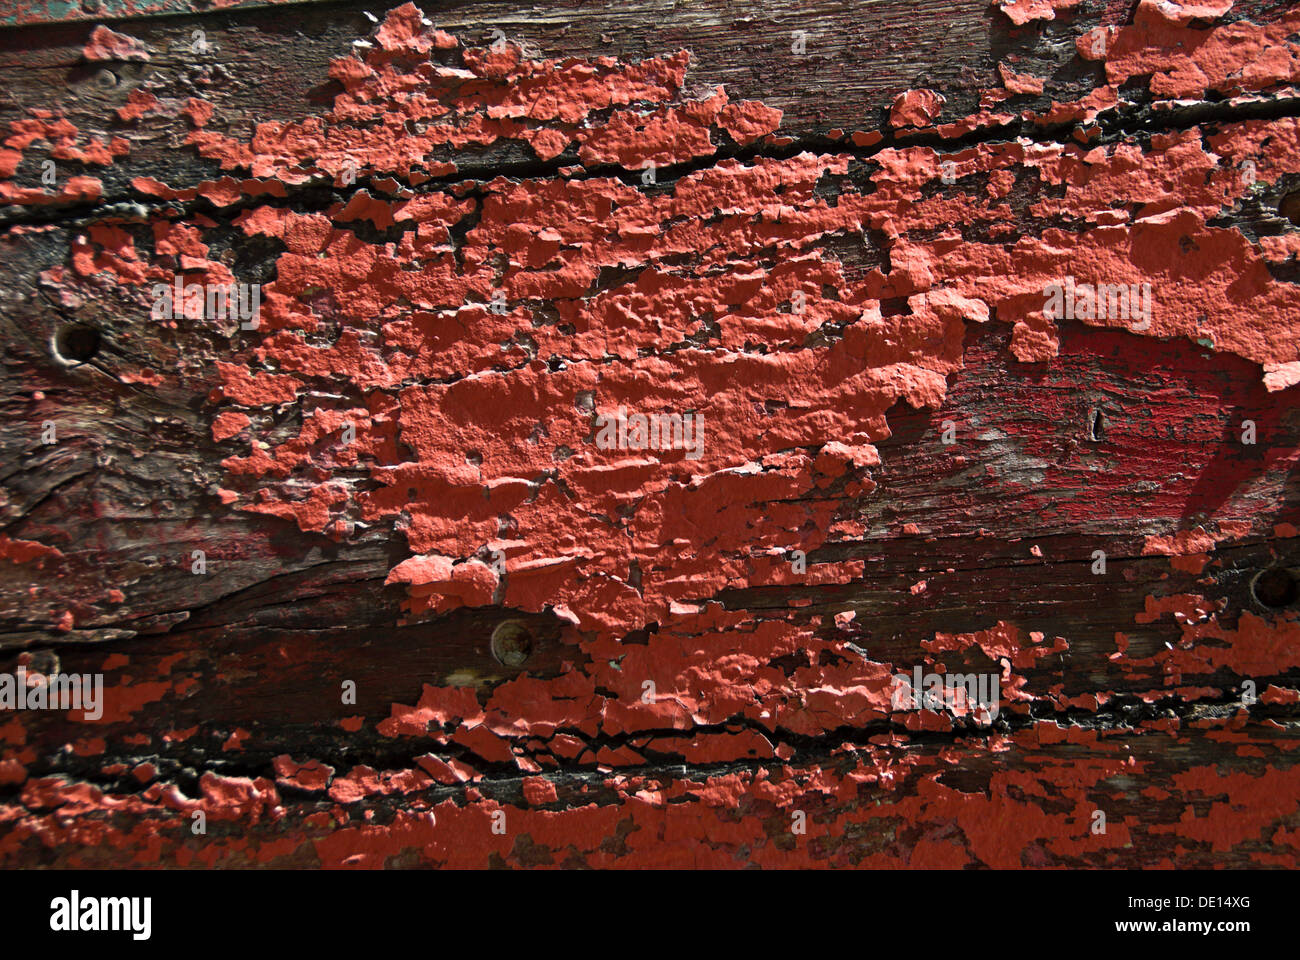 Weathered wooden beams with fragments of red paint, detailed view Stock Photo